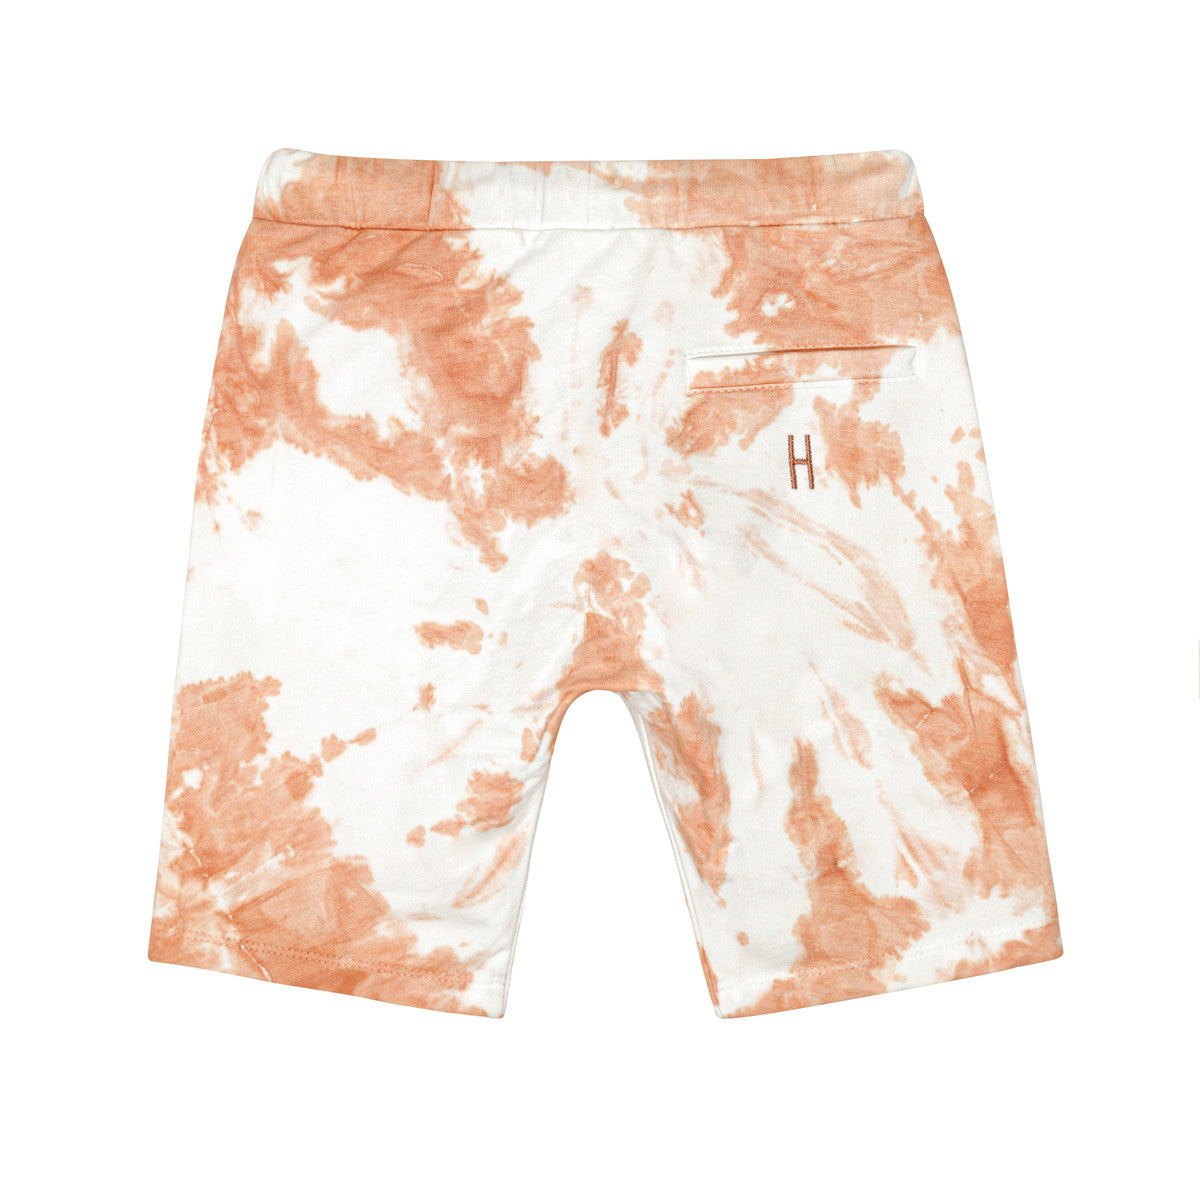 Little Hedonist super comfy organic surfer shorts in Tie Dye Orange made from our softest organic cotton. Sustainable kids clothing for boys and girls.